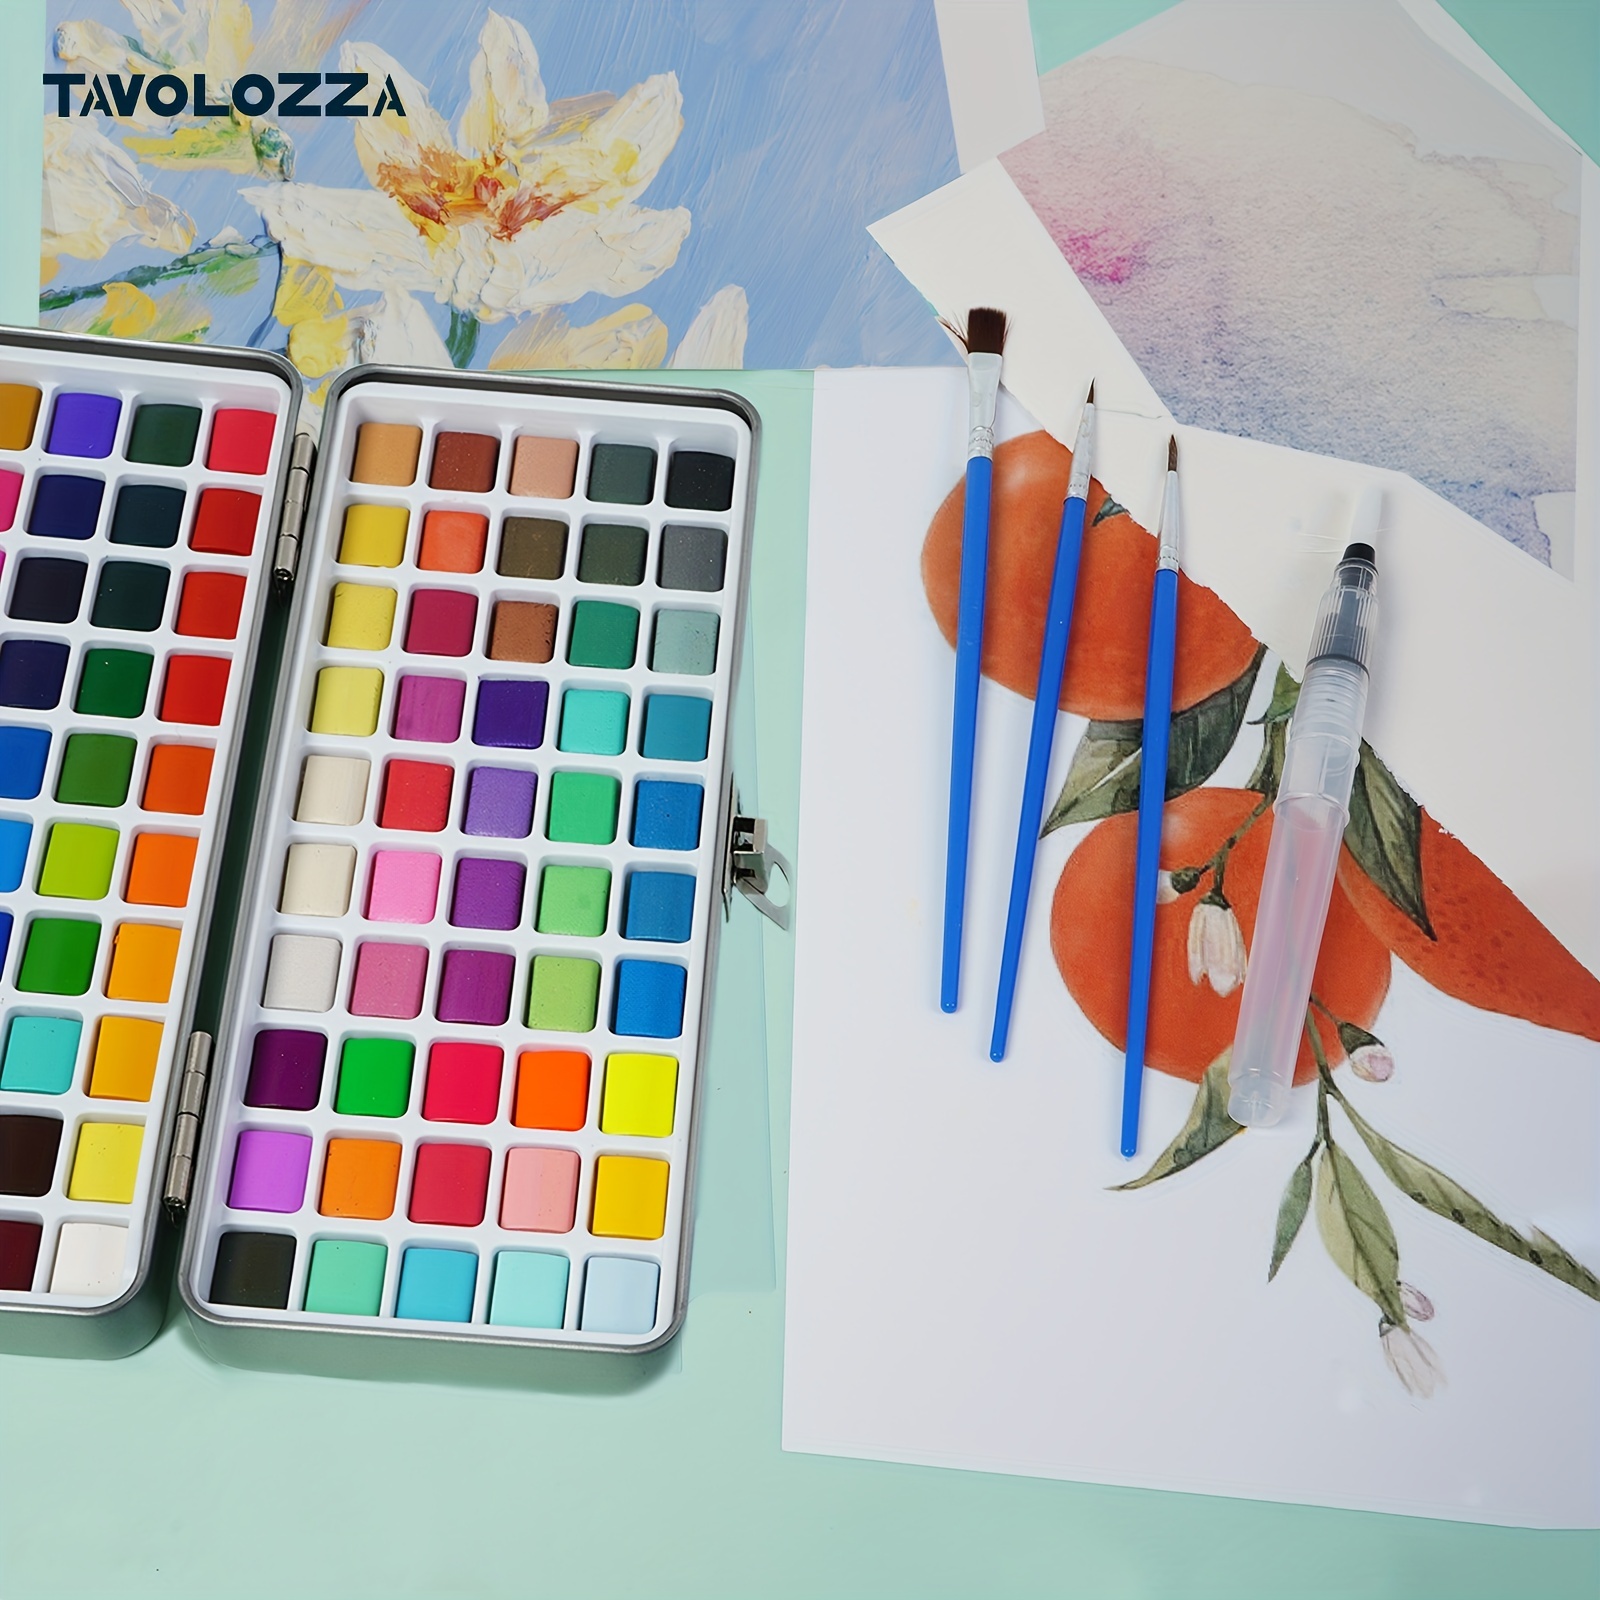 Tavolozza Art Watercolor Paint Essential Set - 100 Vibrant Colors -  Lightweight And Portable - Perfect For Budding Hobbyists And Professional  Artists